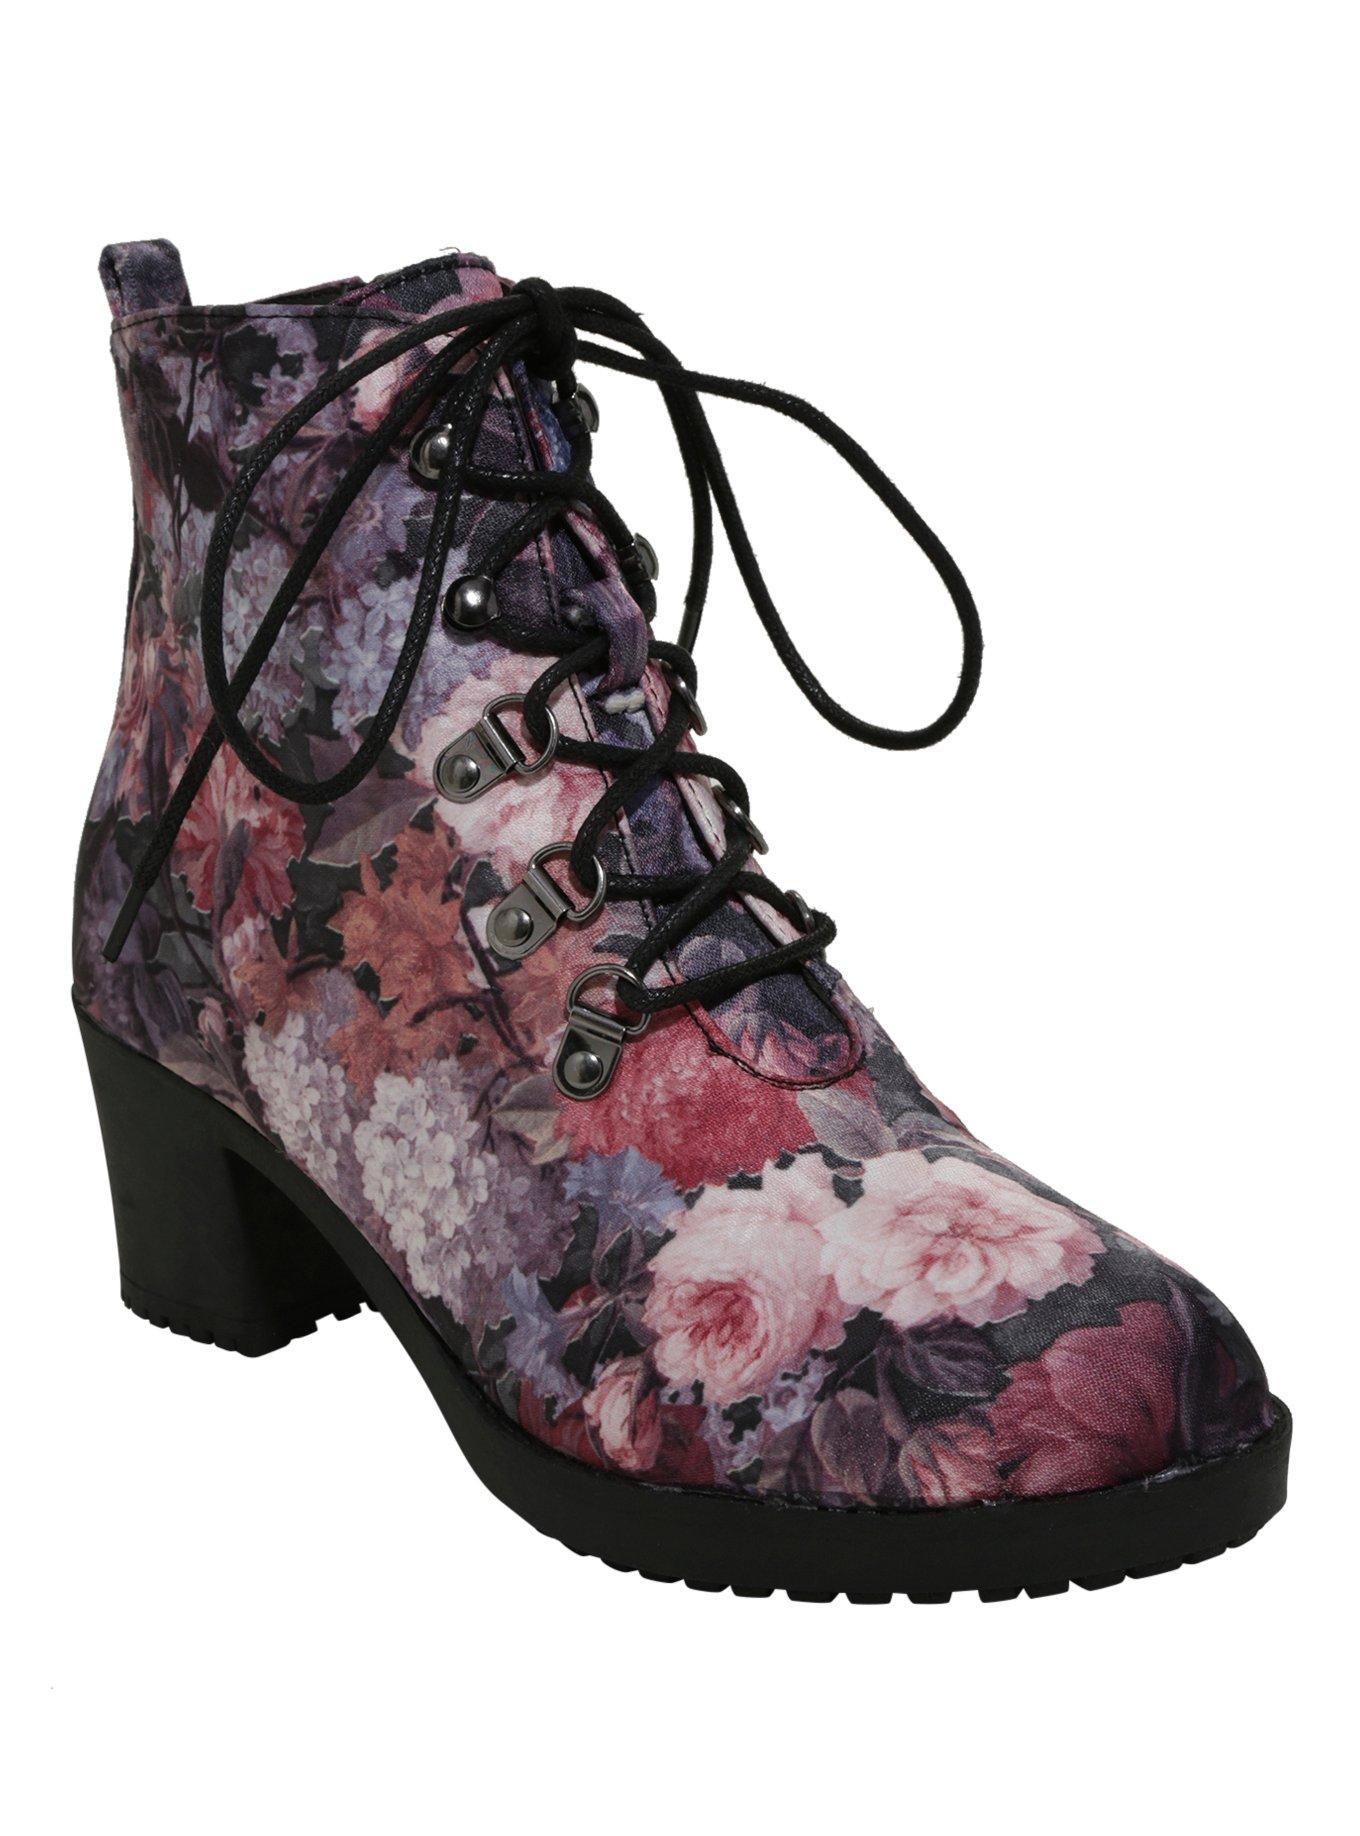 Satin Purple & Pink Floral Fabric Booties | Hot Topic